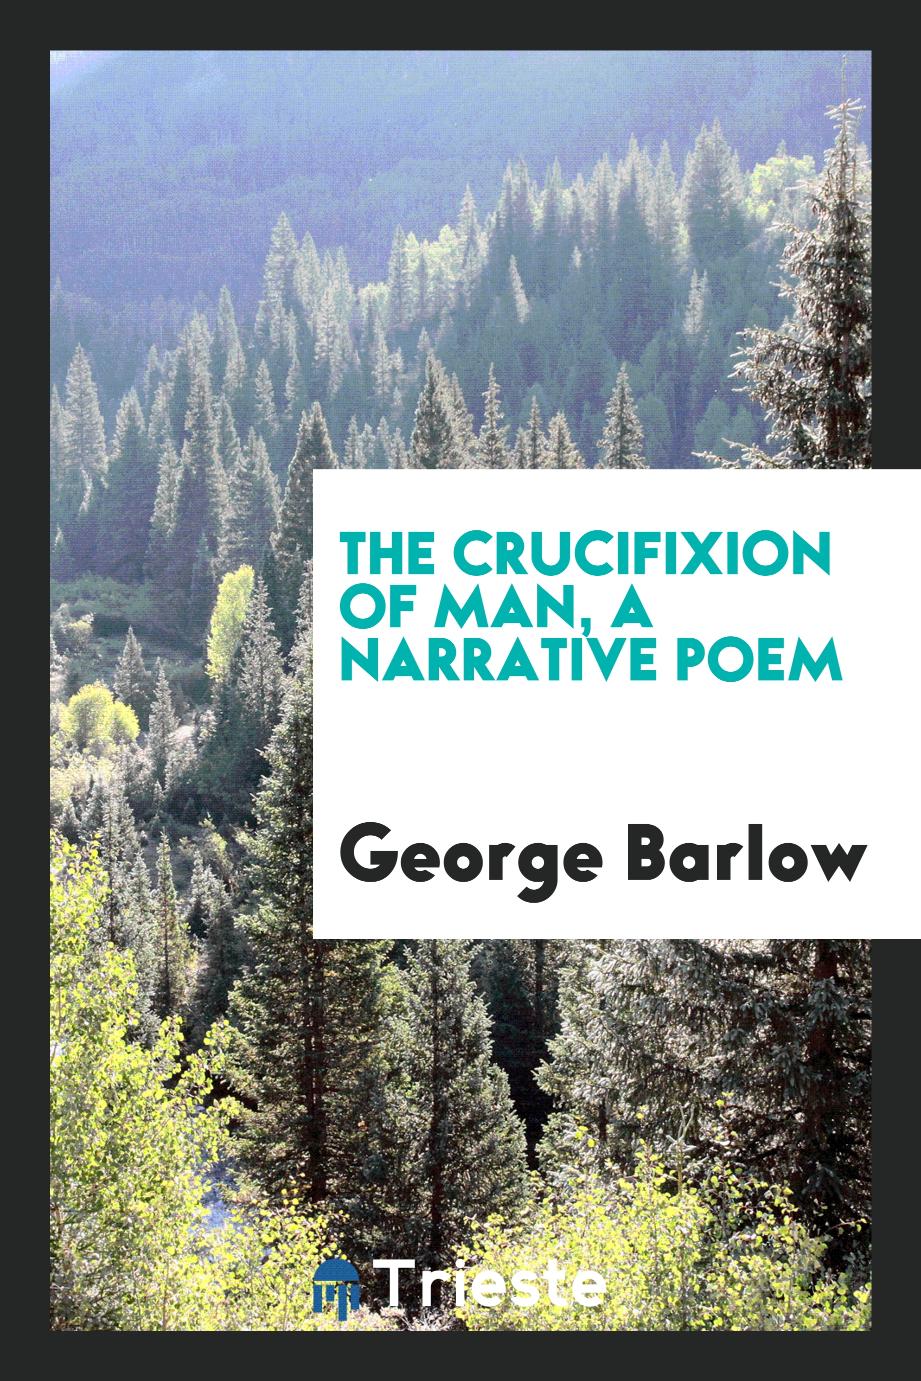 The crucifixion of man, a narrative poem